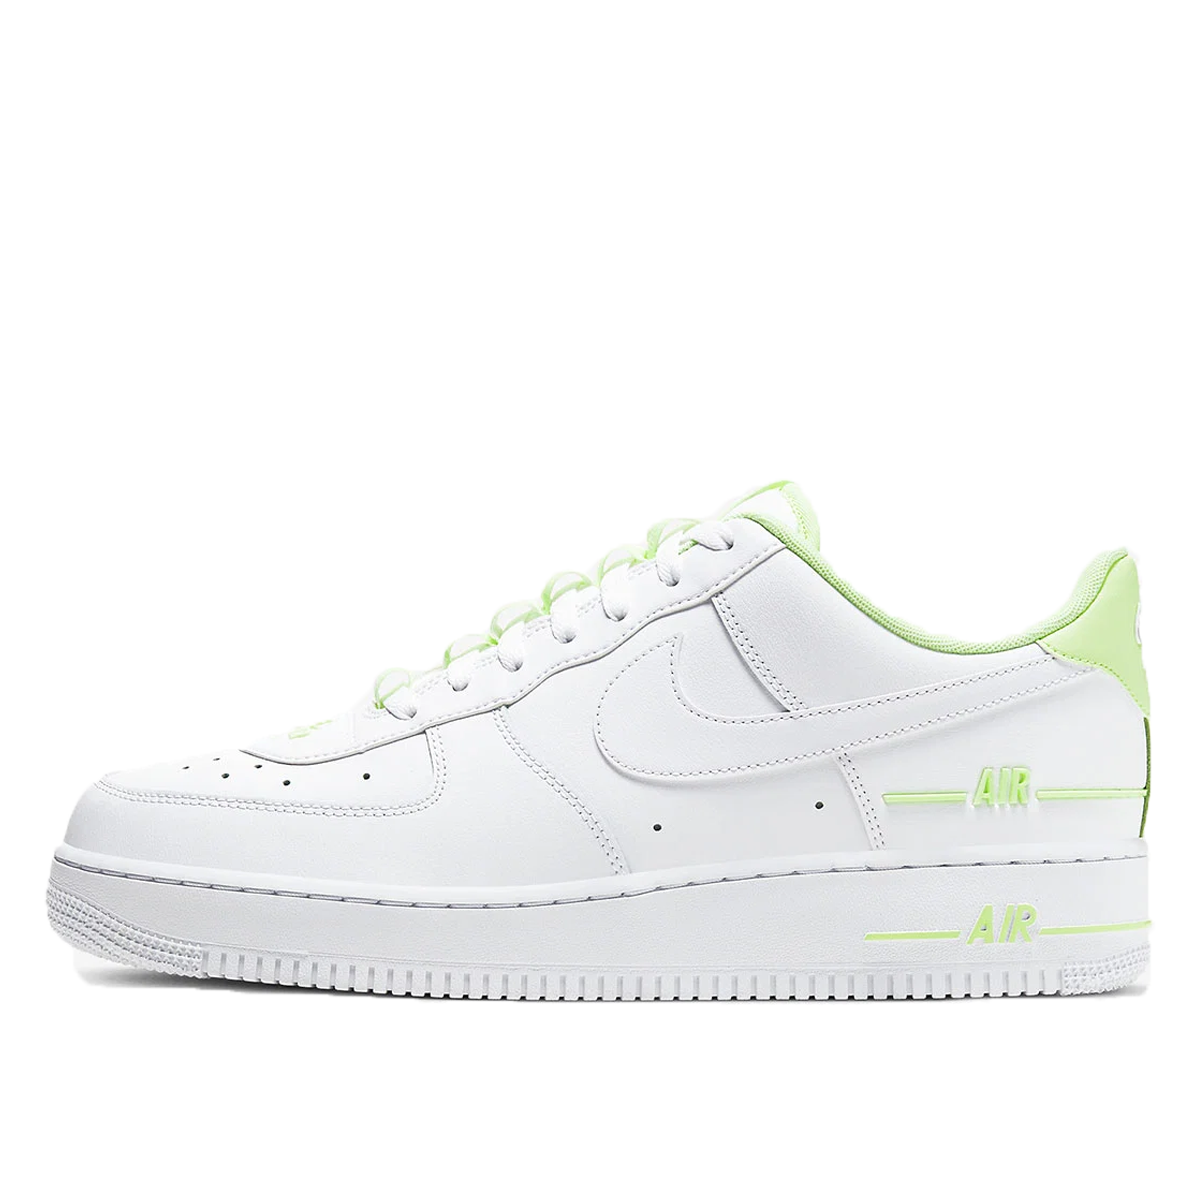 Air Force 1 '07 LV8 "Double Air Pack - White Barely Volt"